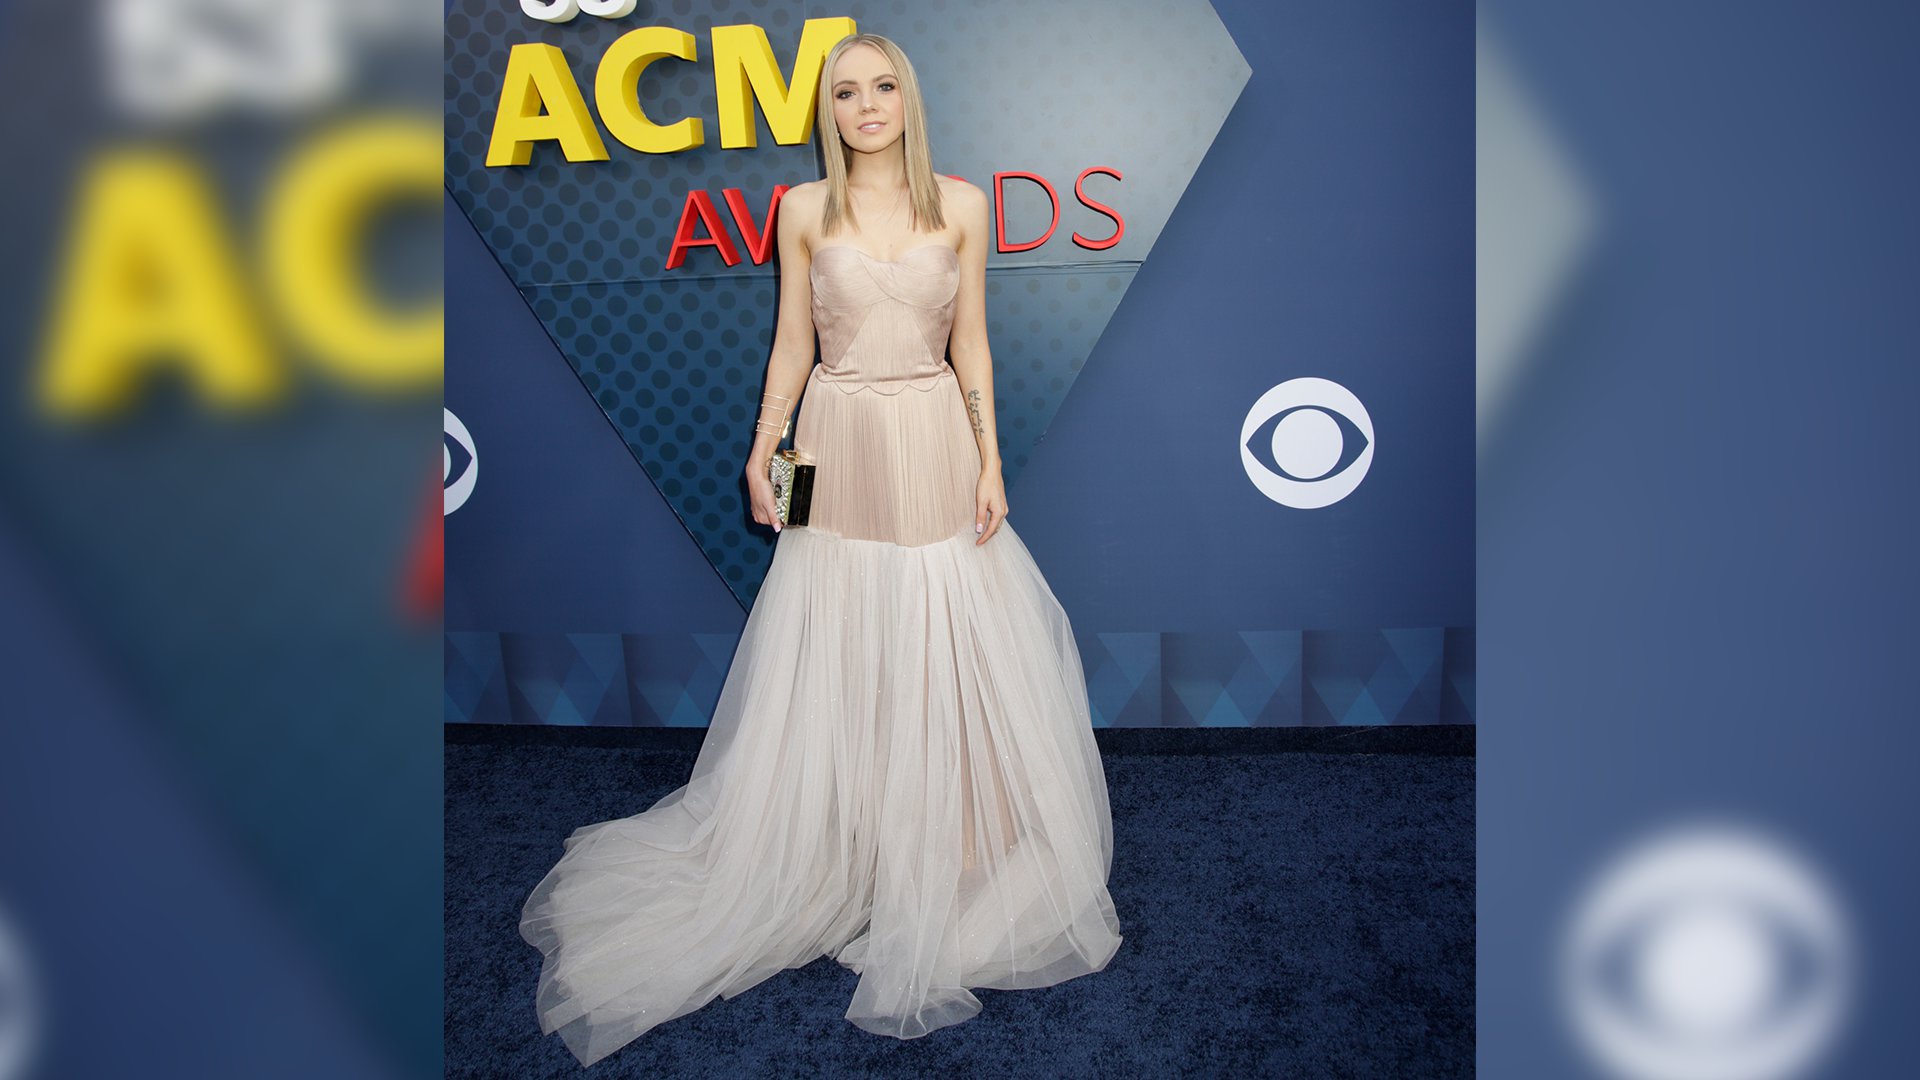 Danielle Bradbery glides down the ACM red carpet in a pale pink evening gown with toile overlay.